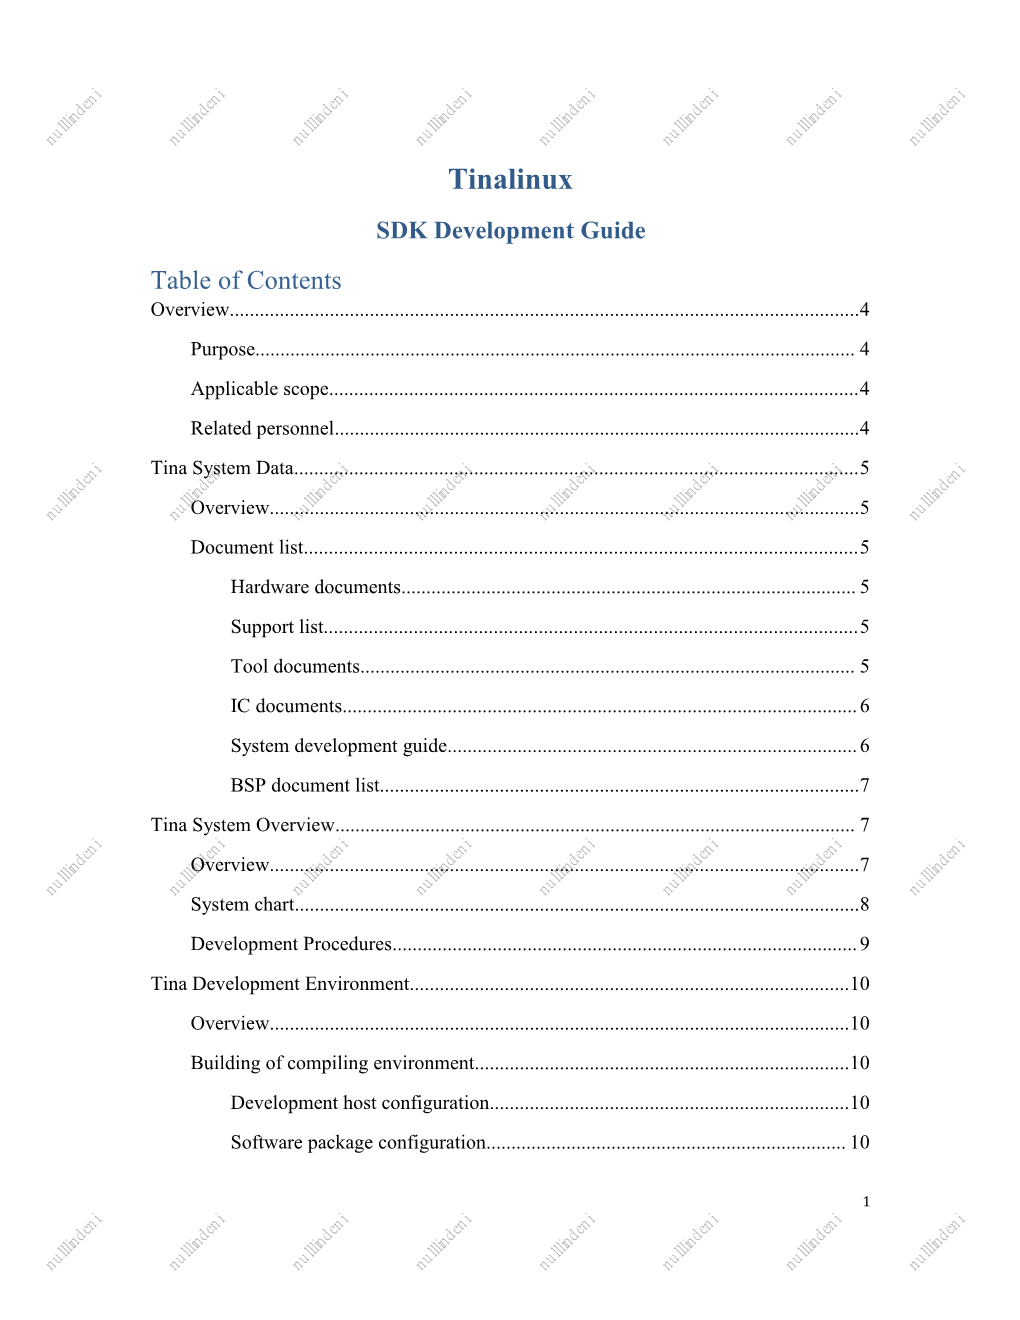 Tinalinux SDK Development Guide Table of Contents Overview